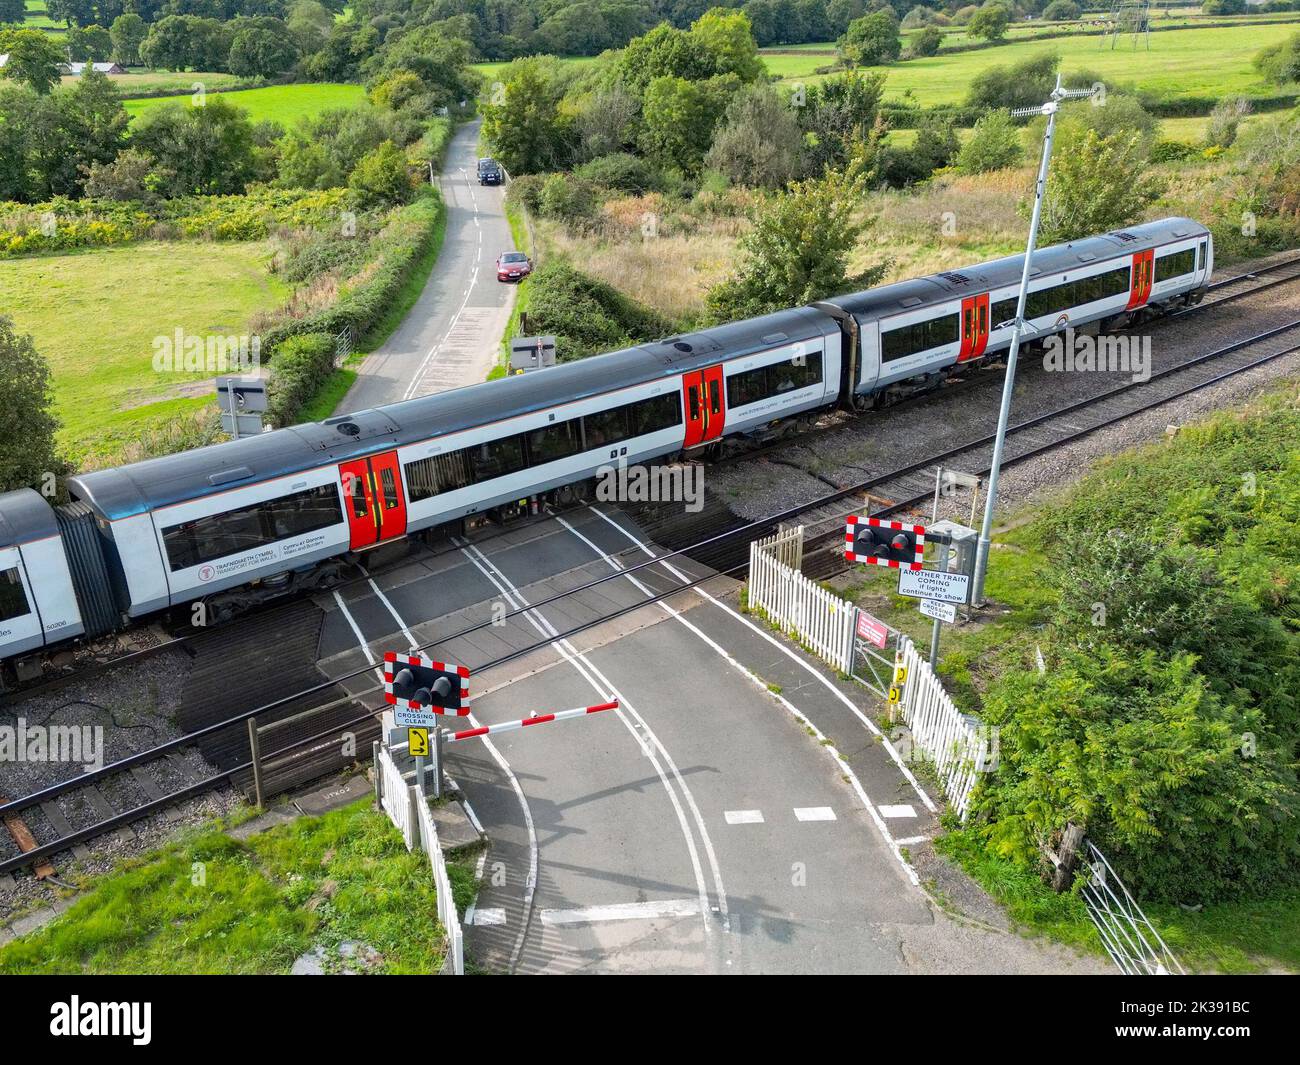 Bonvilston, Vale of Glamorgan, Wales - September 2022: Aerial view of a commuter train passing a level crossing on the outskirts of Cardiff. Stock Photo